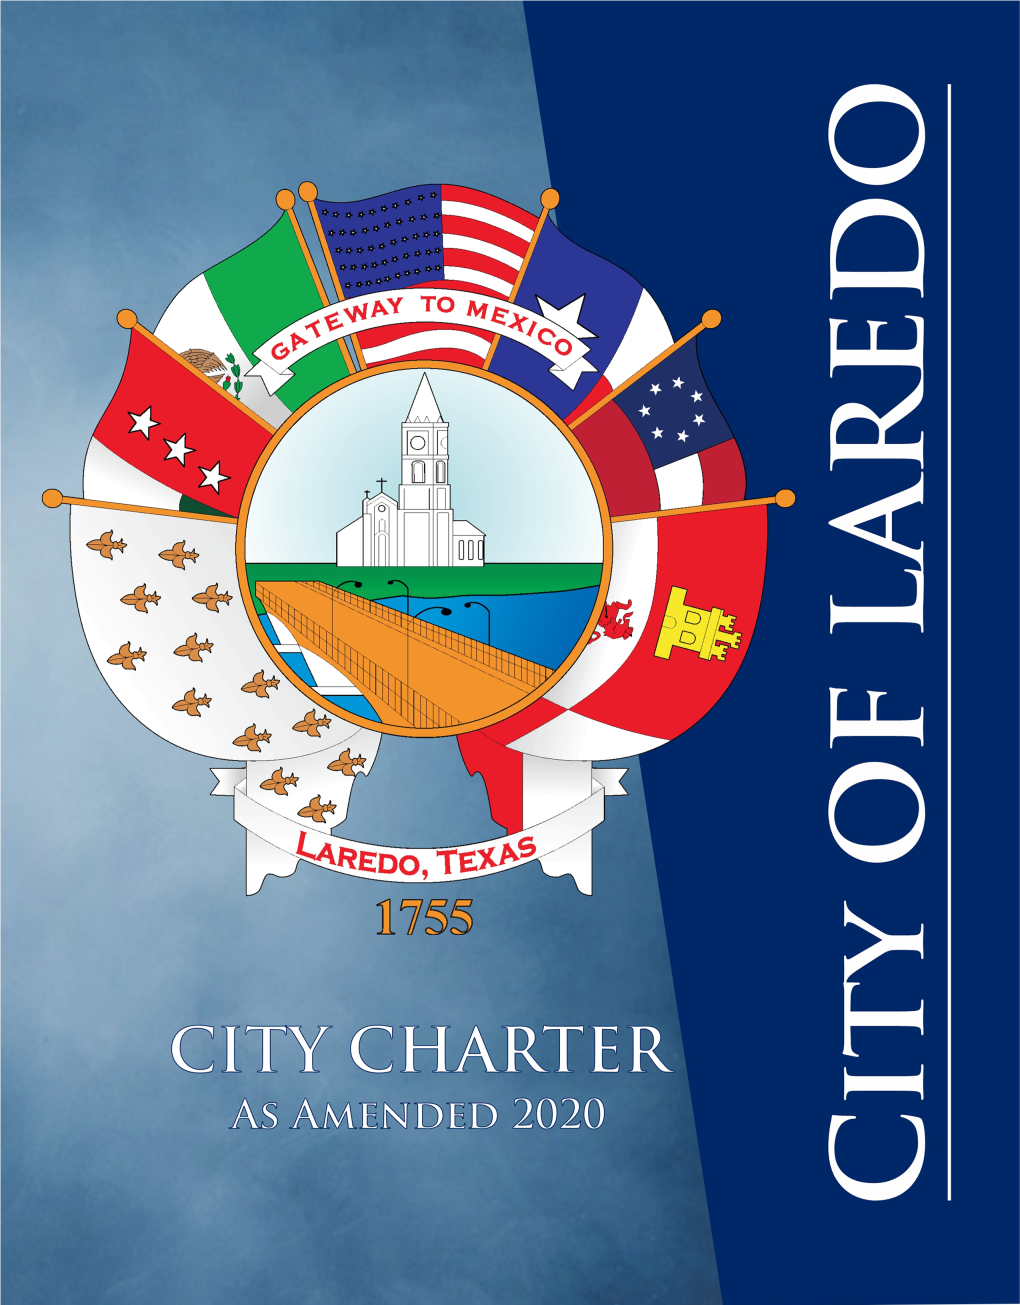 Laredo City Charter Revision Commission Which Were Approved by the Citizens of the City of Laredo